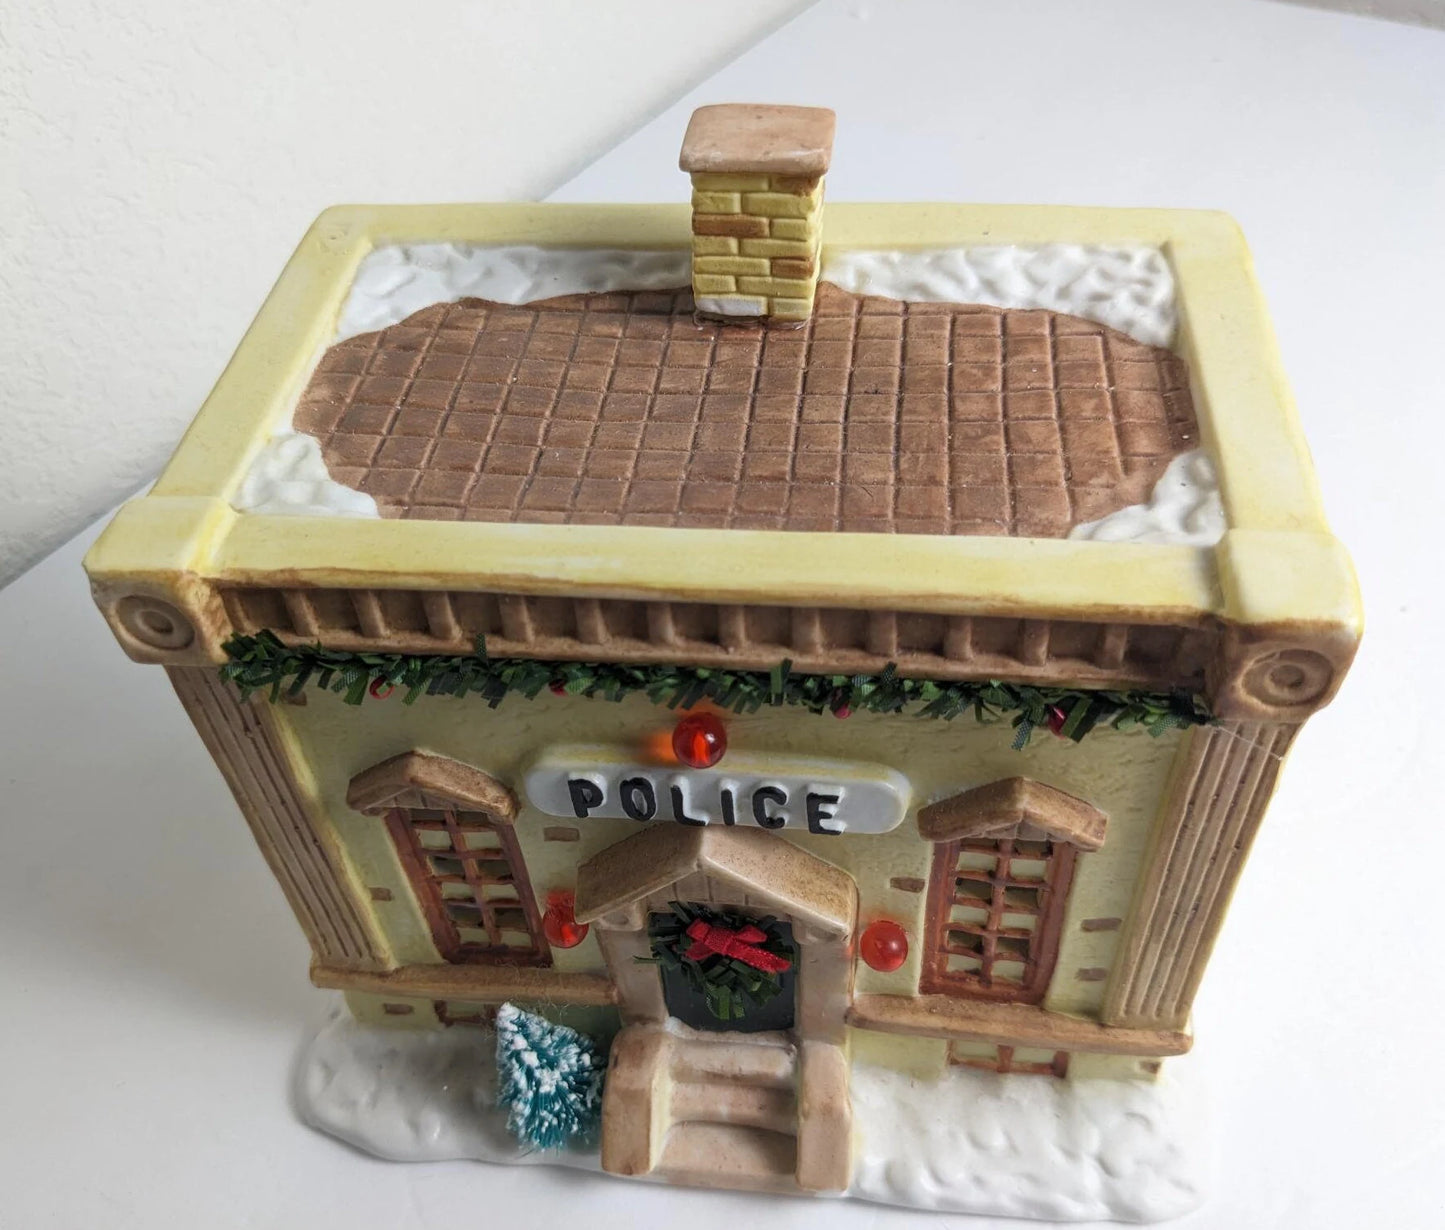 Christmas Valley Police Station Village Accessories